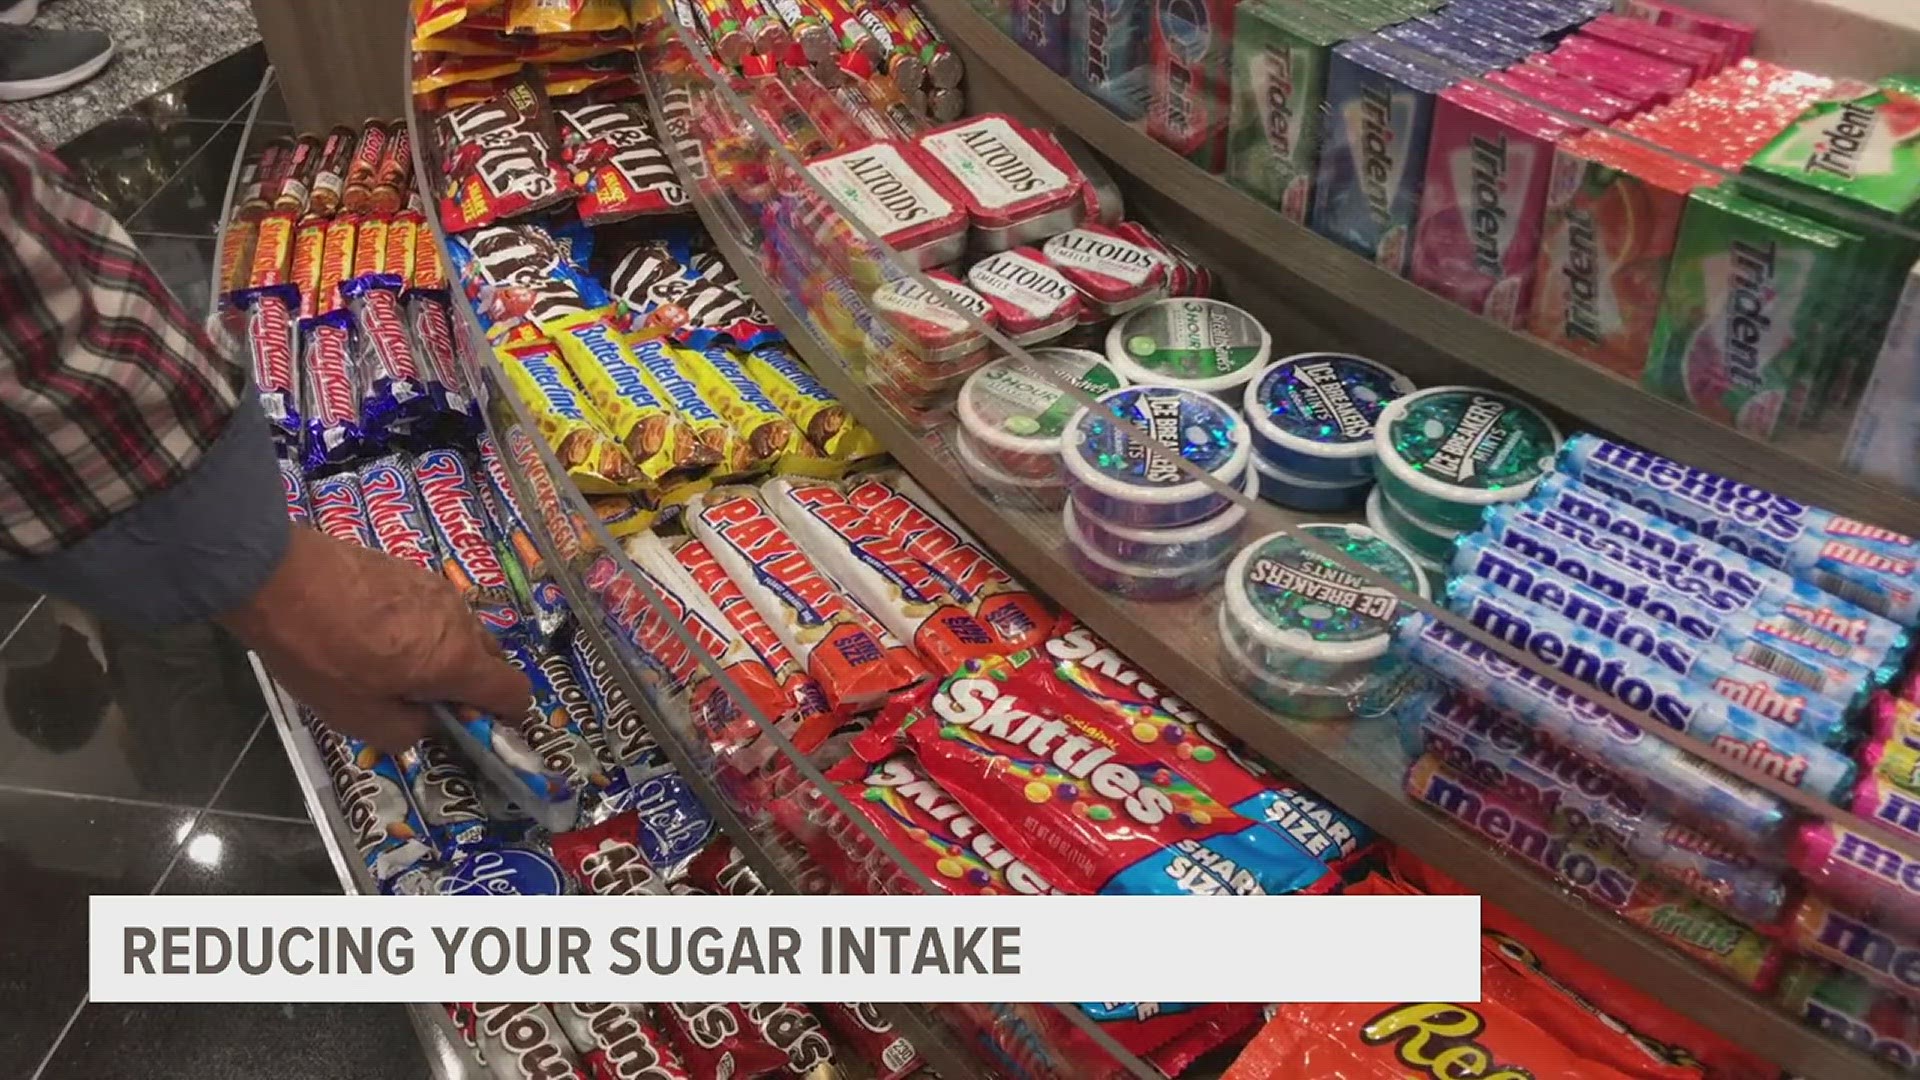 While products with sugar in them tend to be addictive, doctors are raising awareness over the negatives of consuming high levels of sugar.